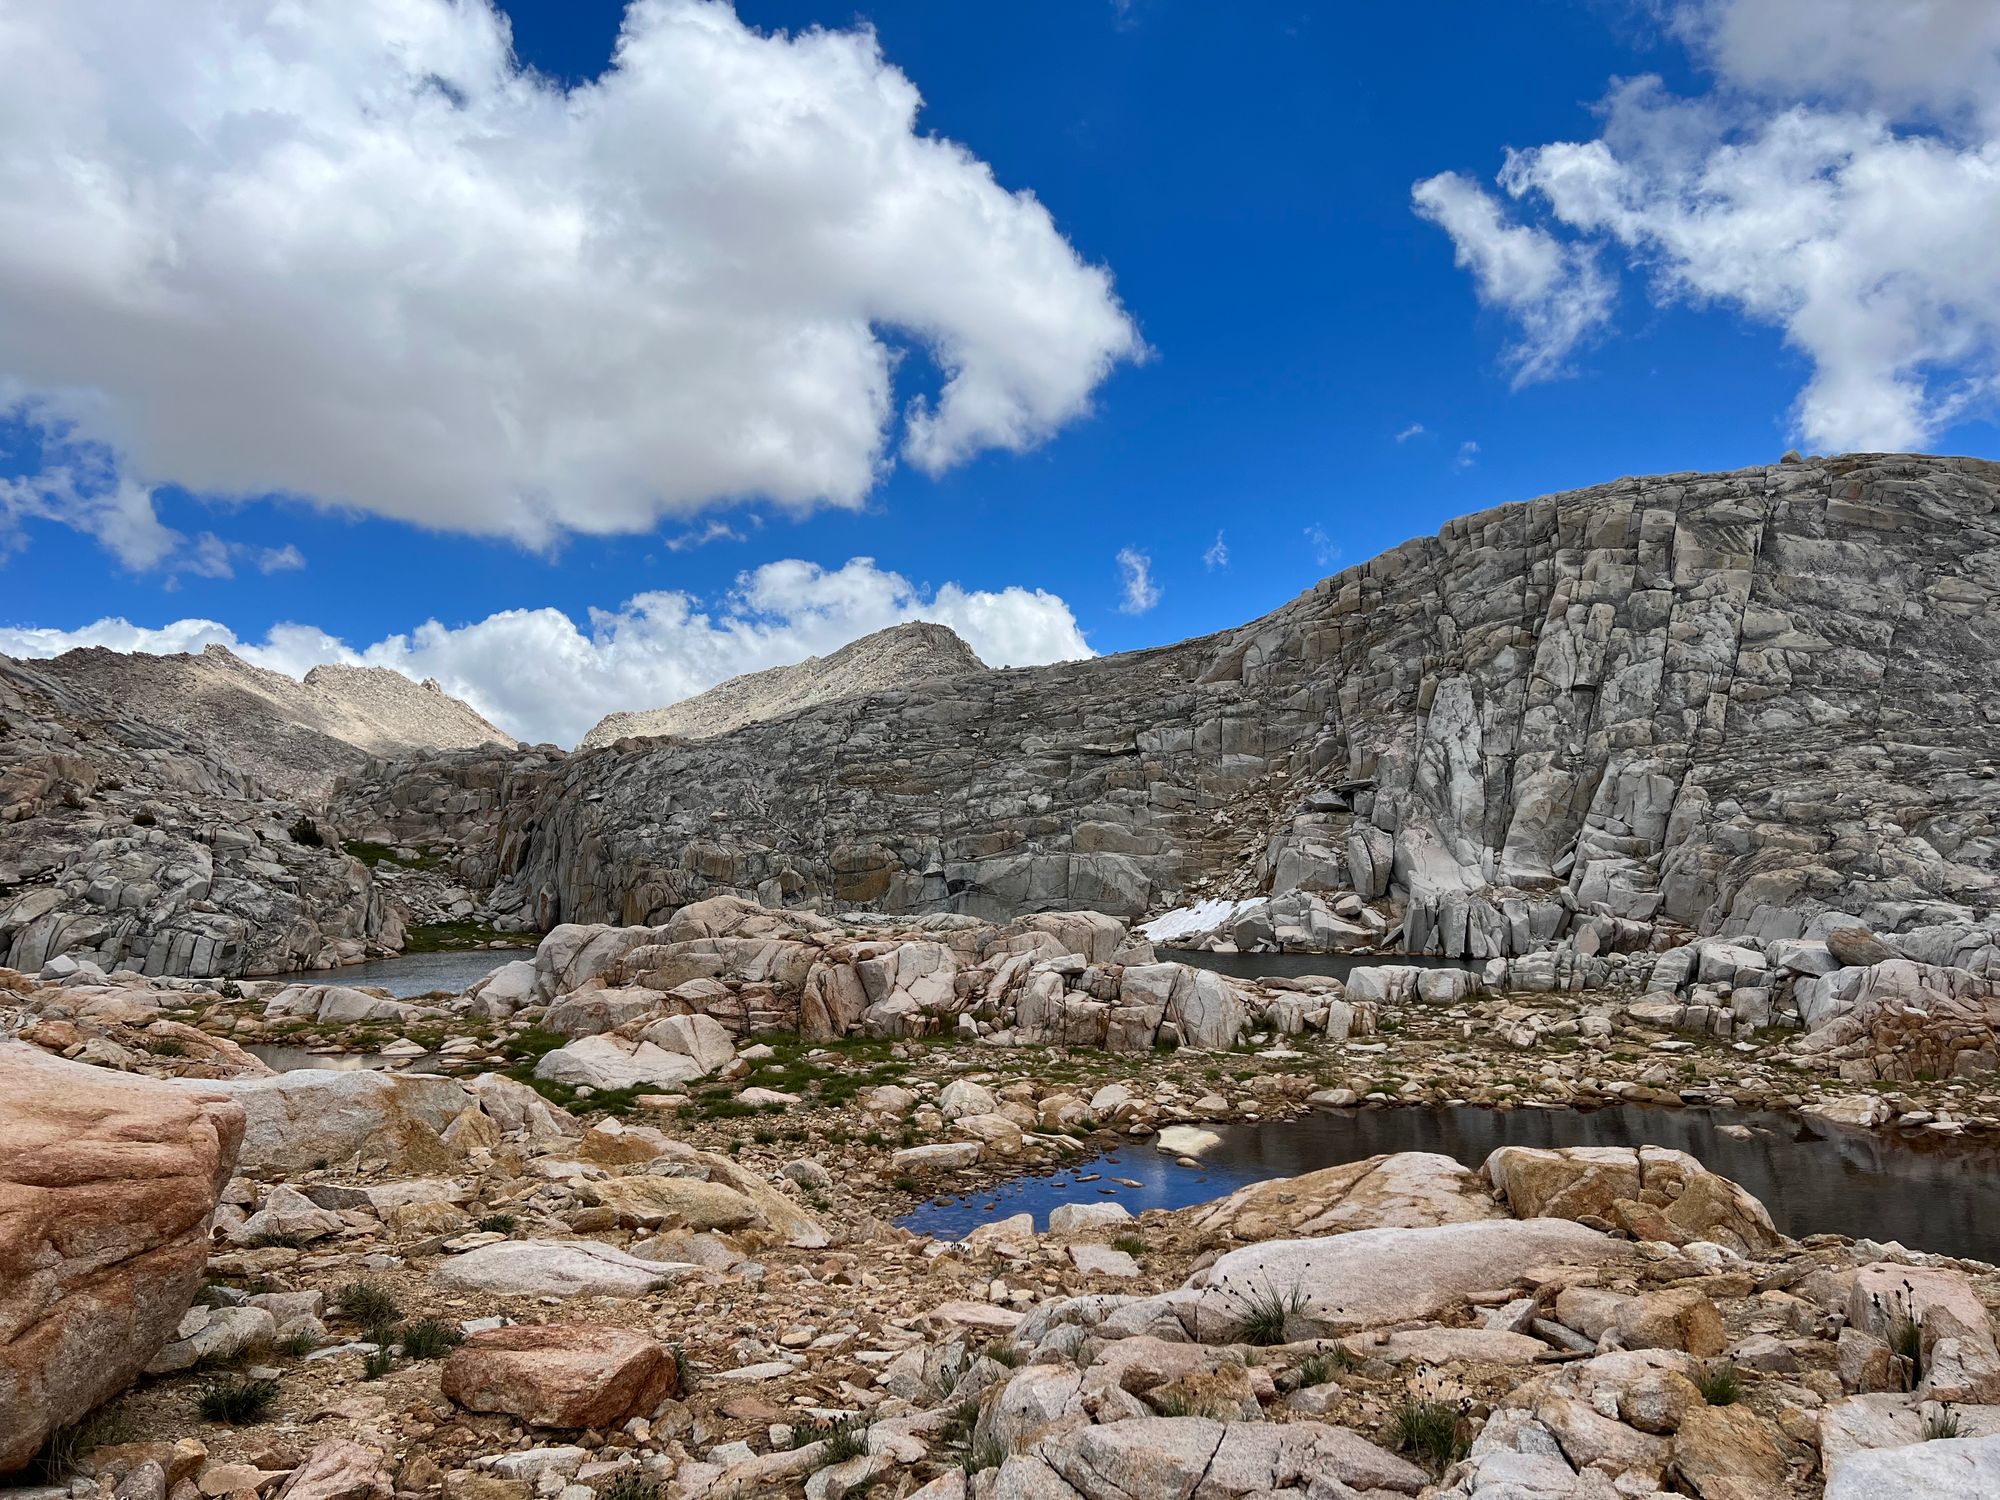 Small ponds of water among rugged granite.